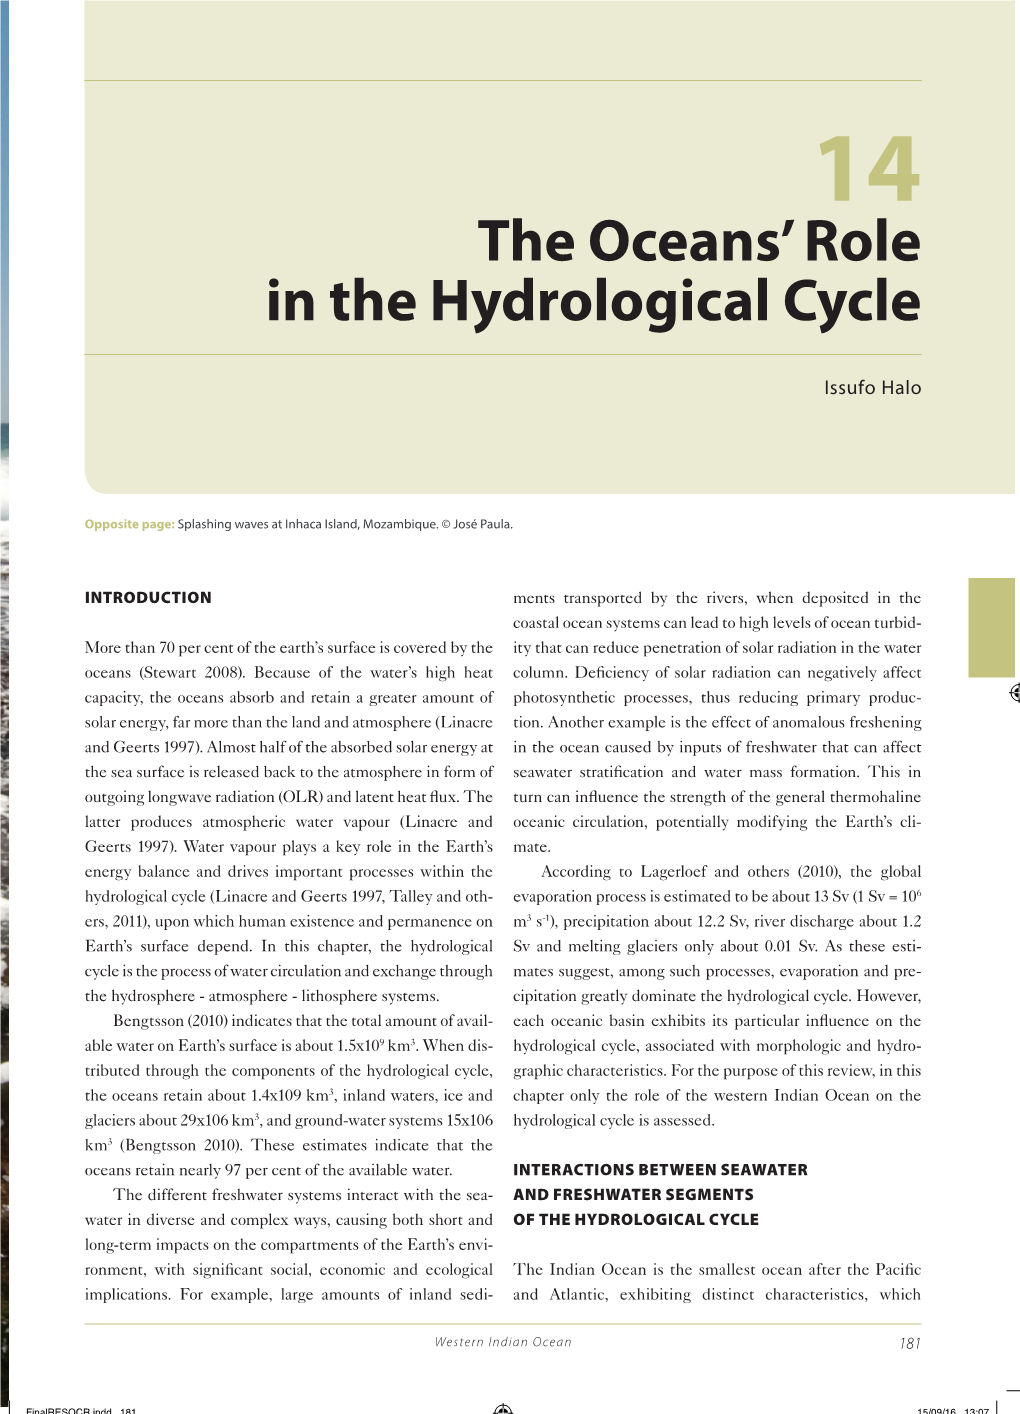 The Oceans' Role in the Hydrological Cycle